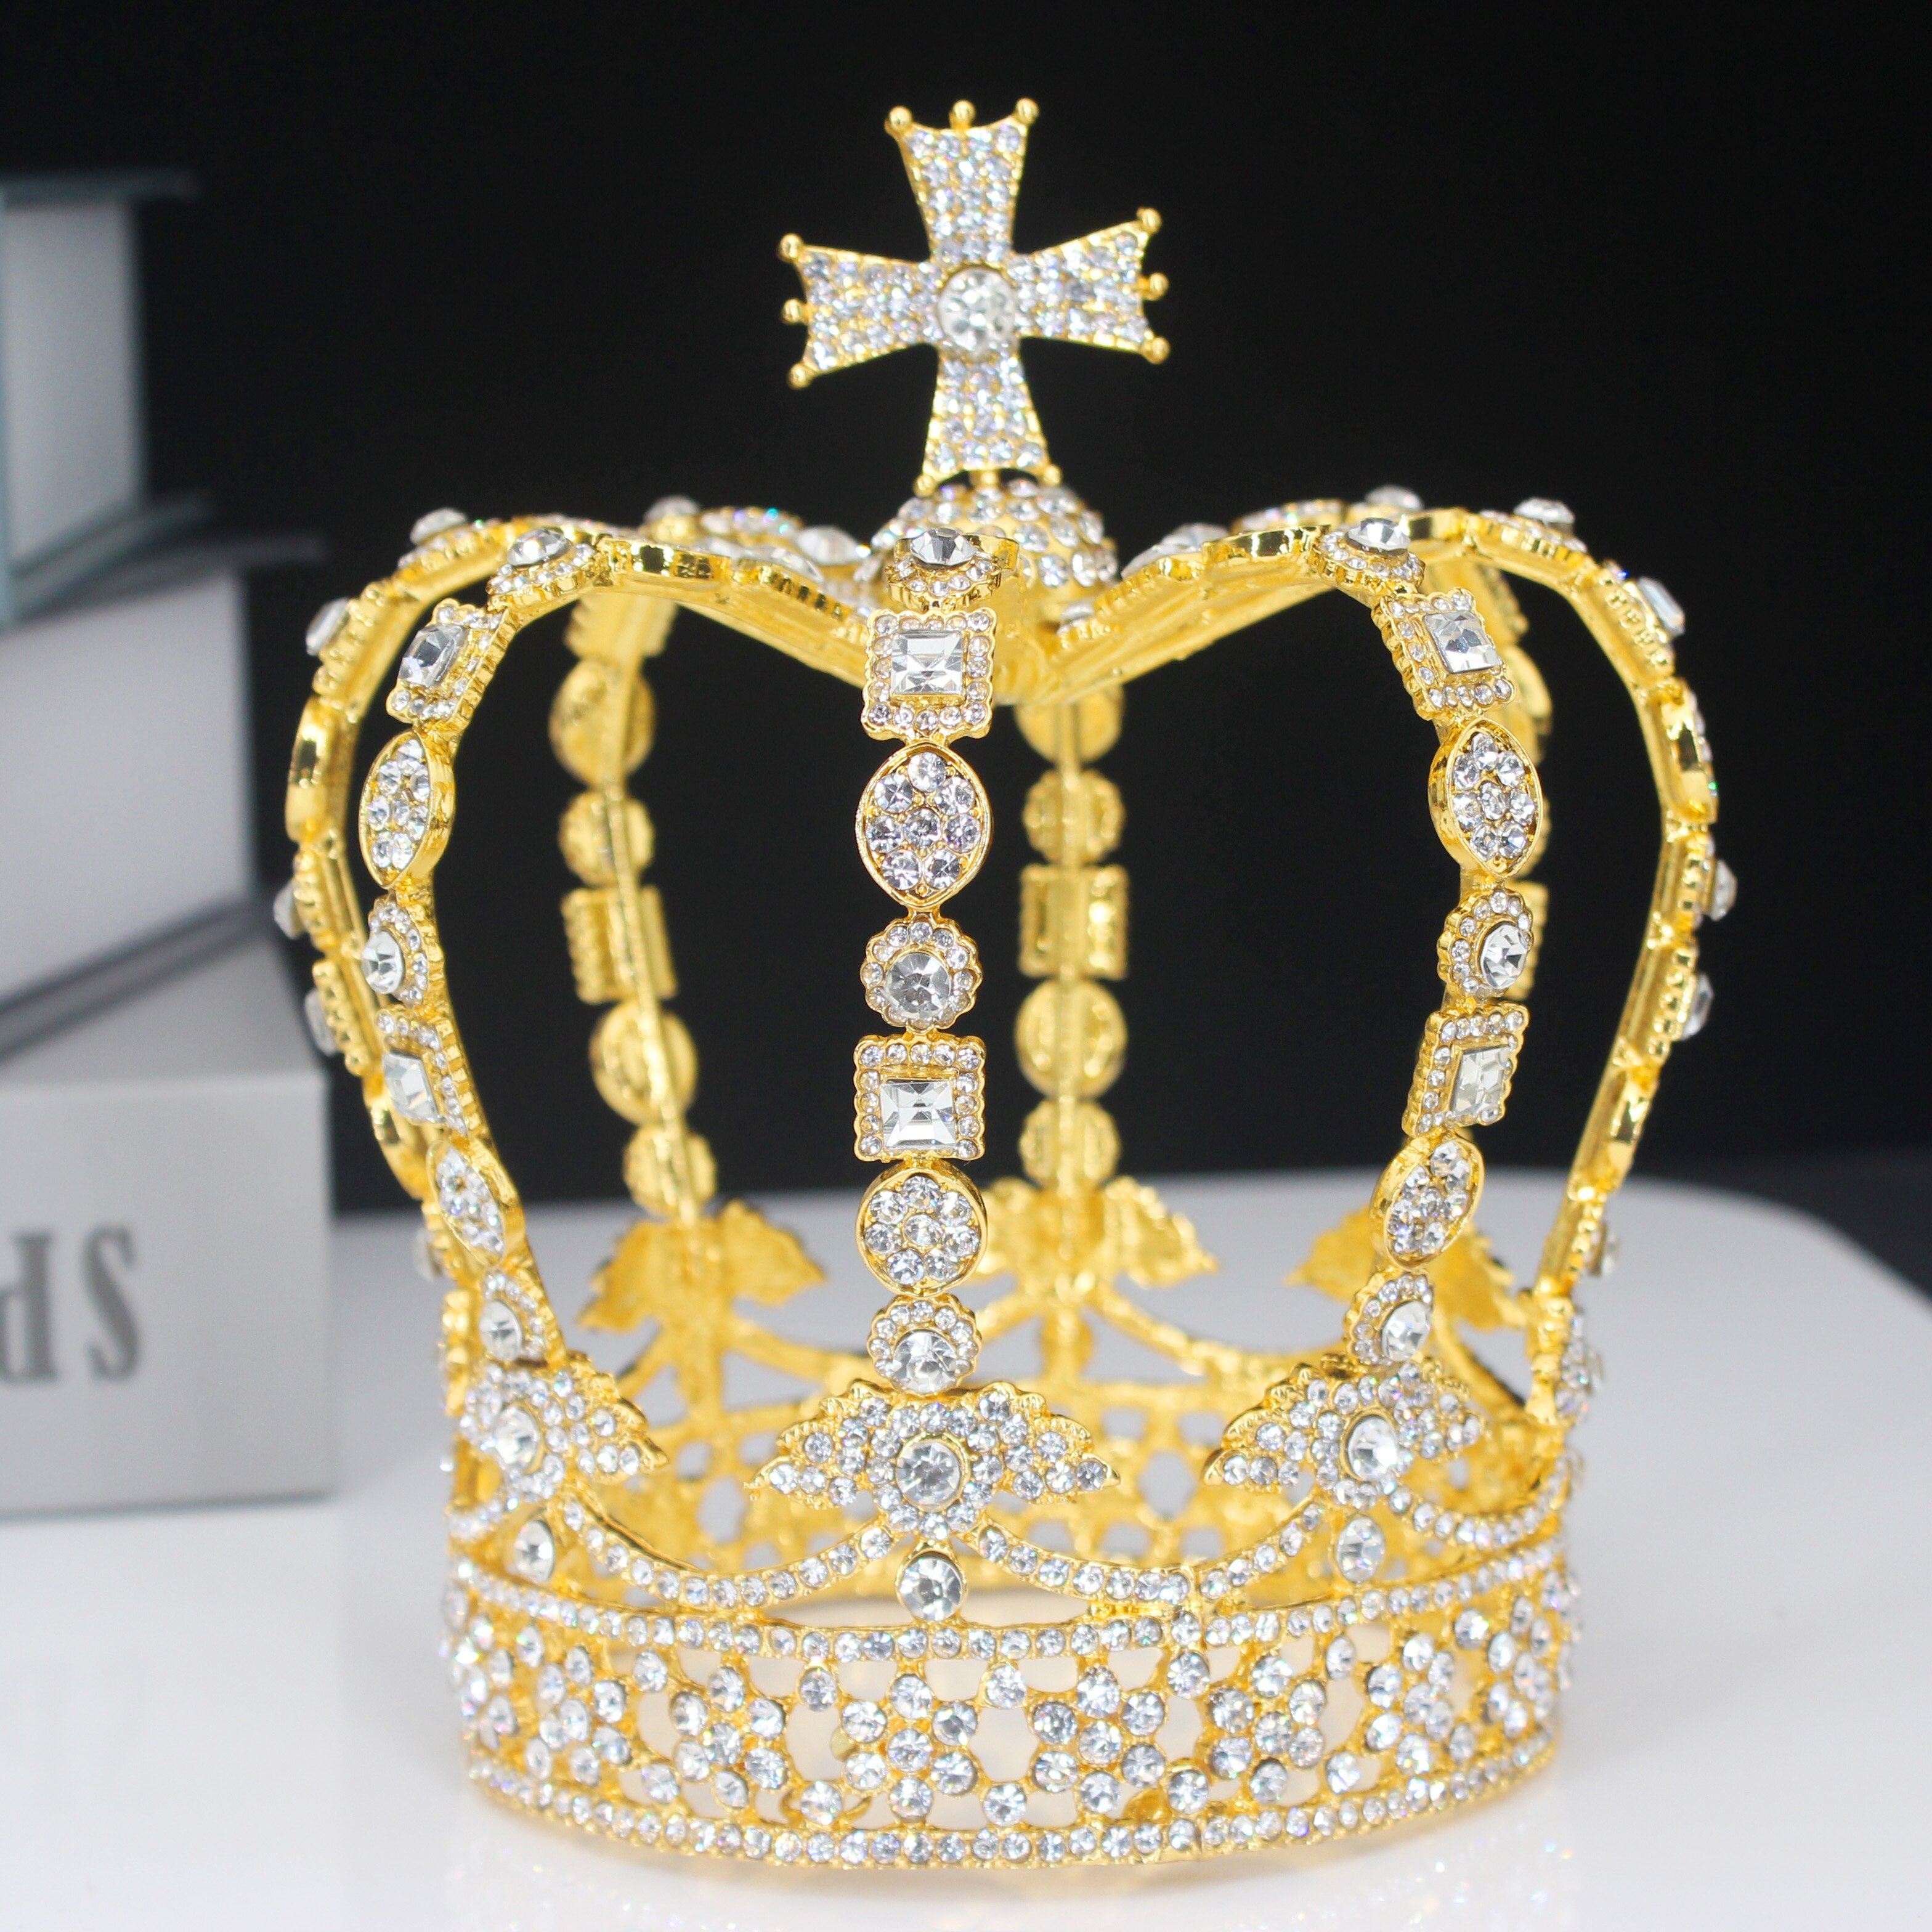 Vintage Royalty Unleashed: Crystal Crowns for Boys and Girls - Unisex Regal Touch in Hair Jewelry Accessories!